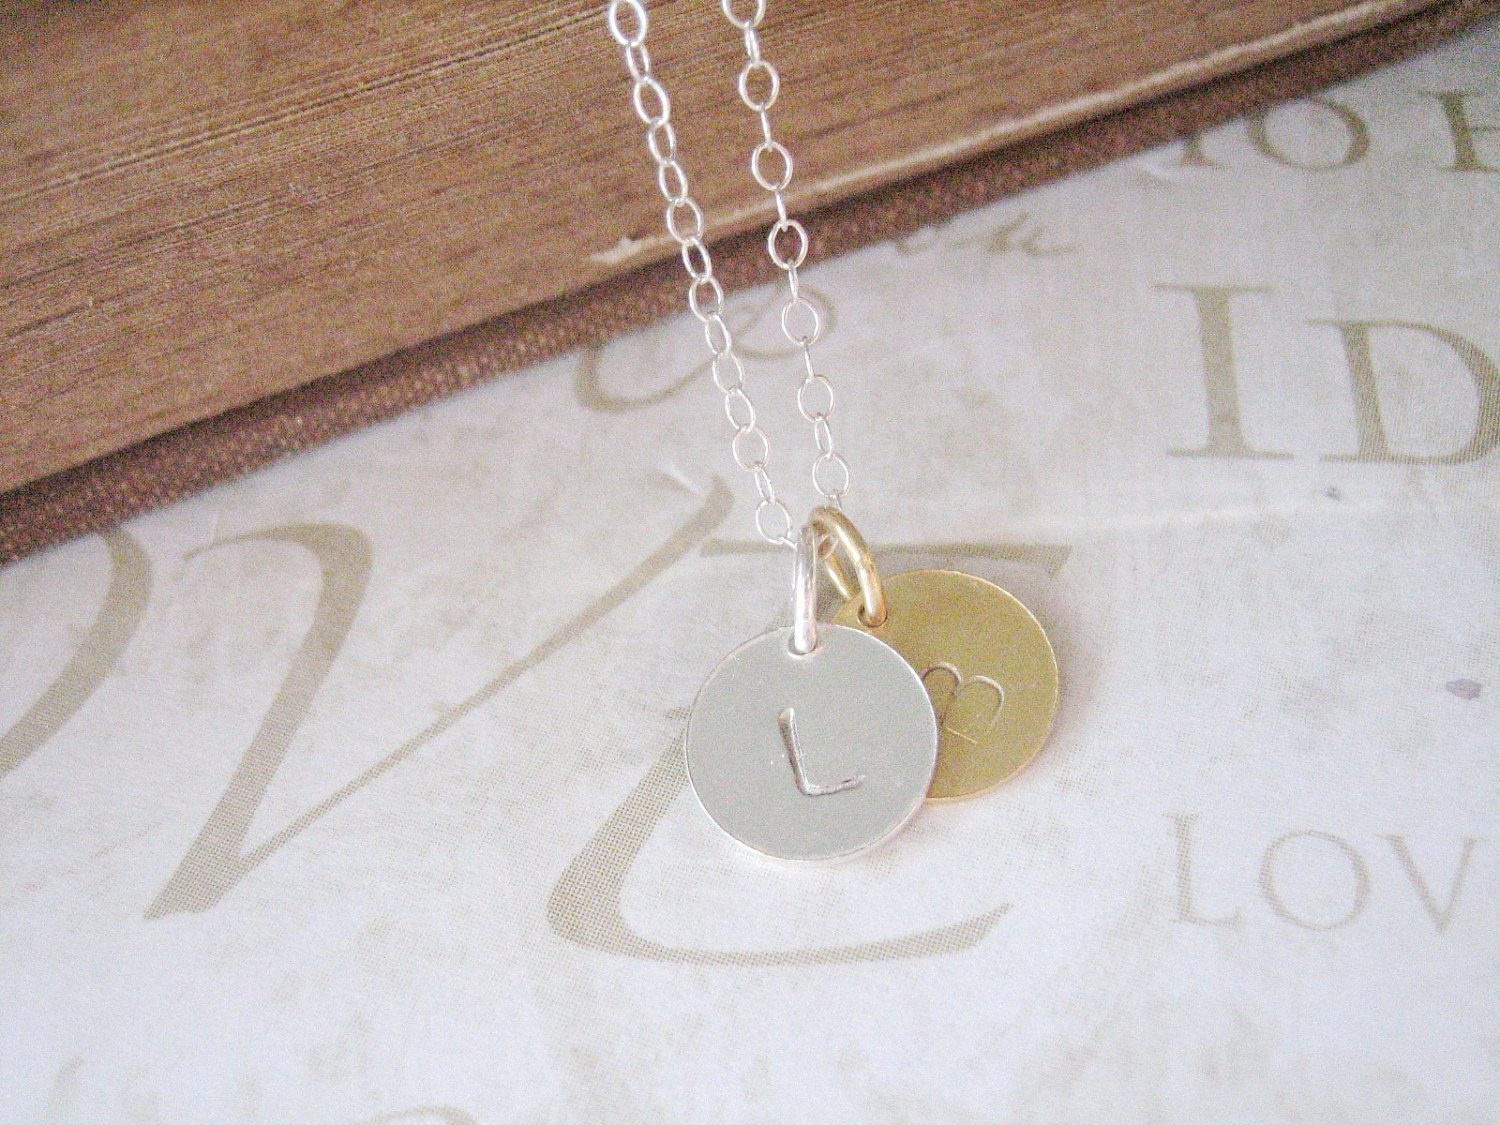 DARLING personalized hand stamped initial necklace by brideblu